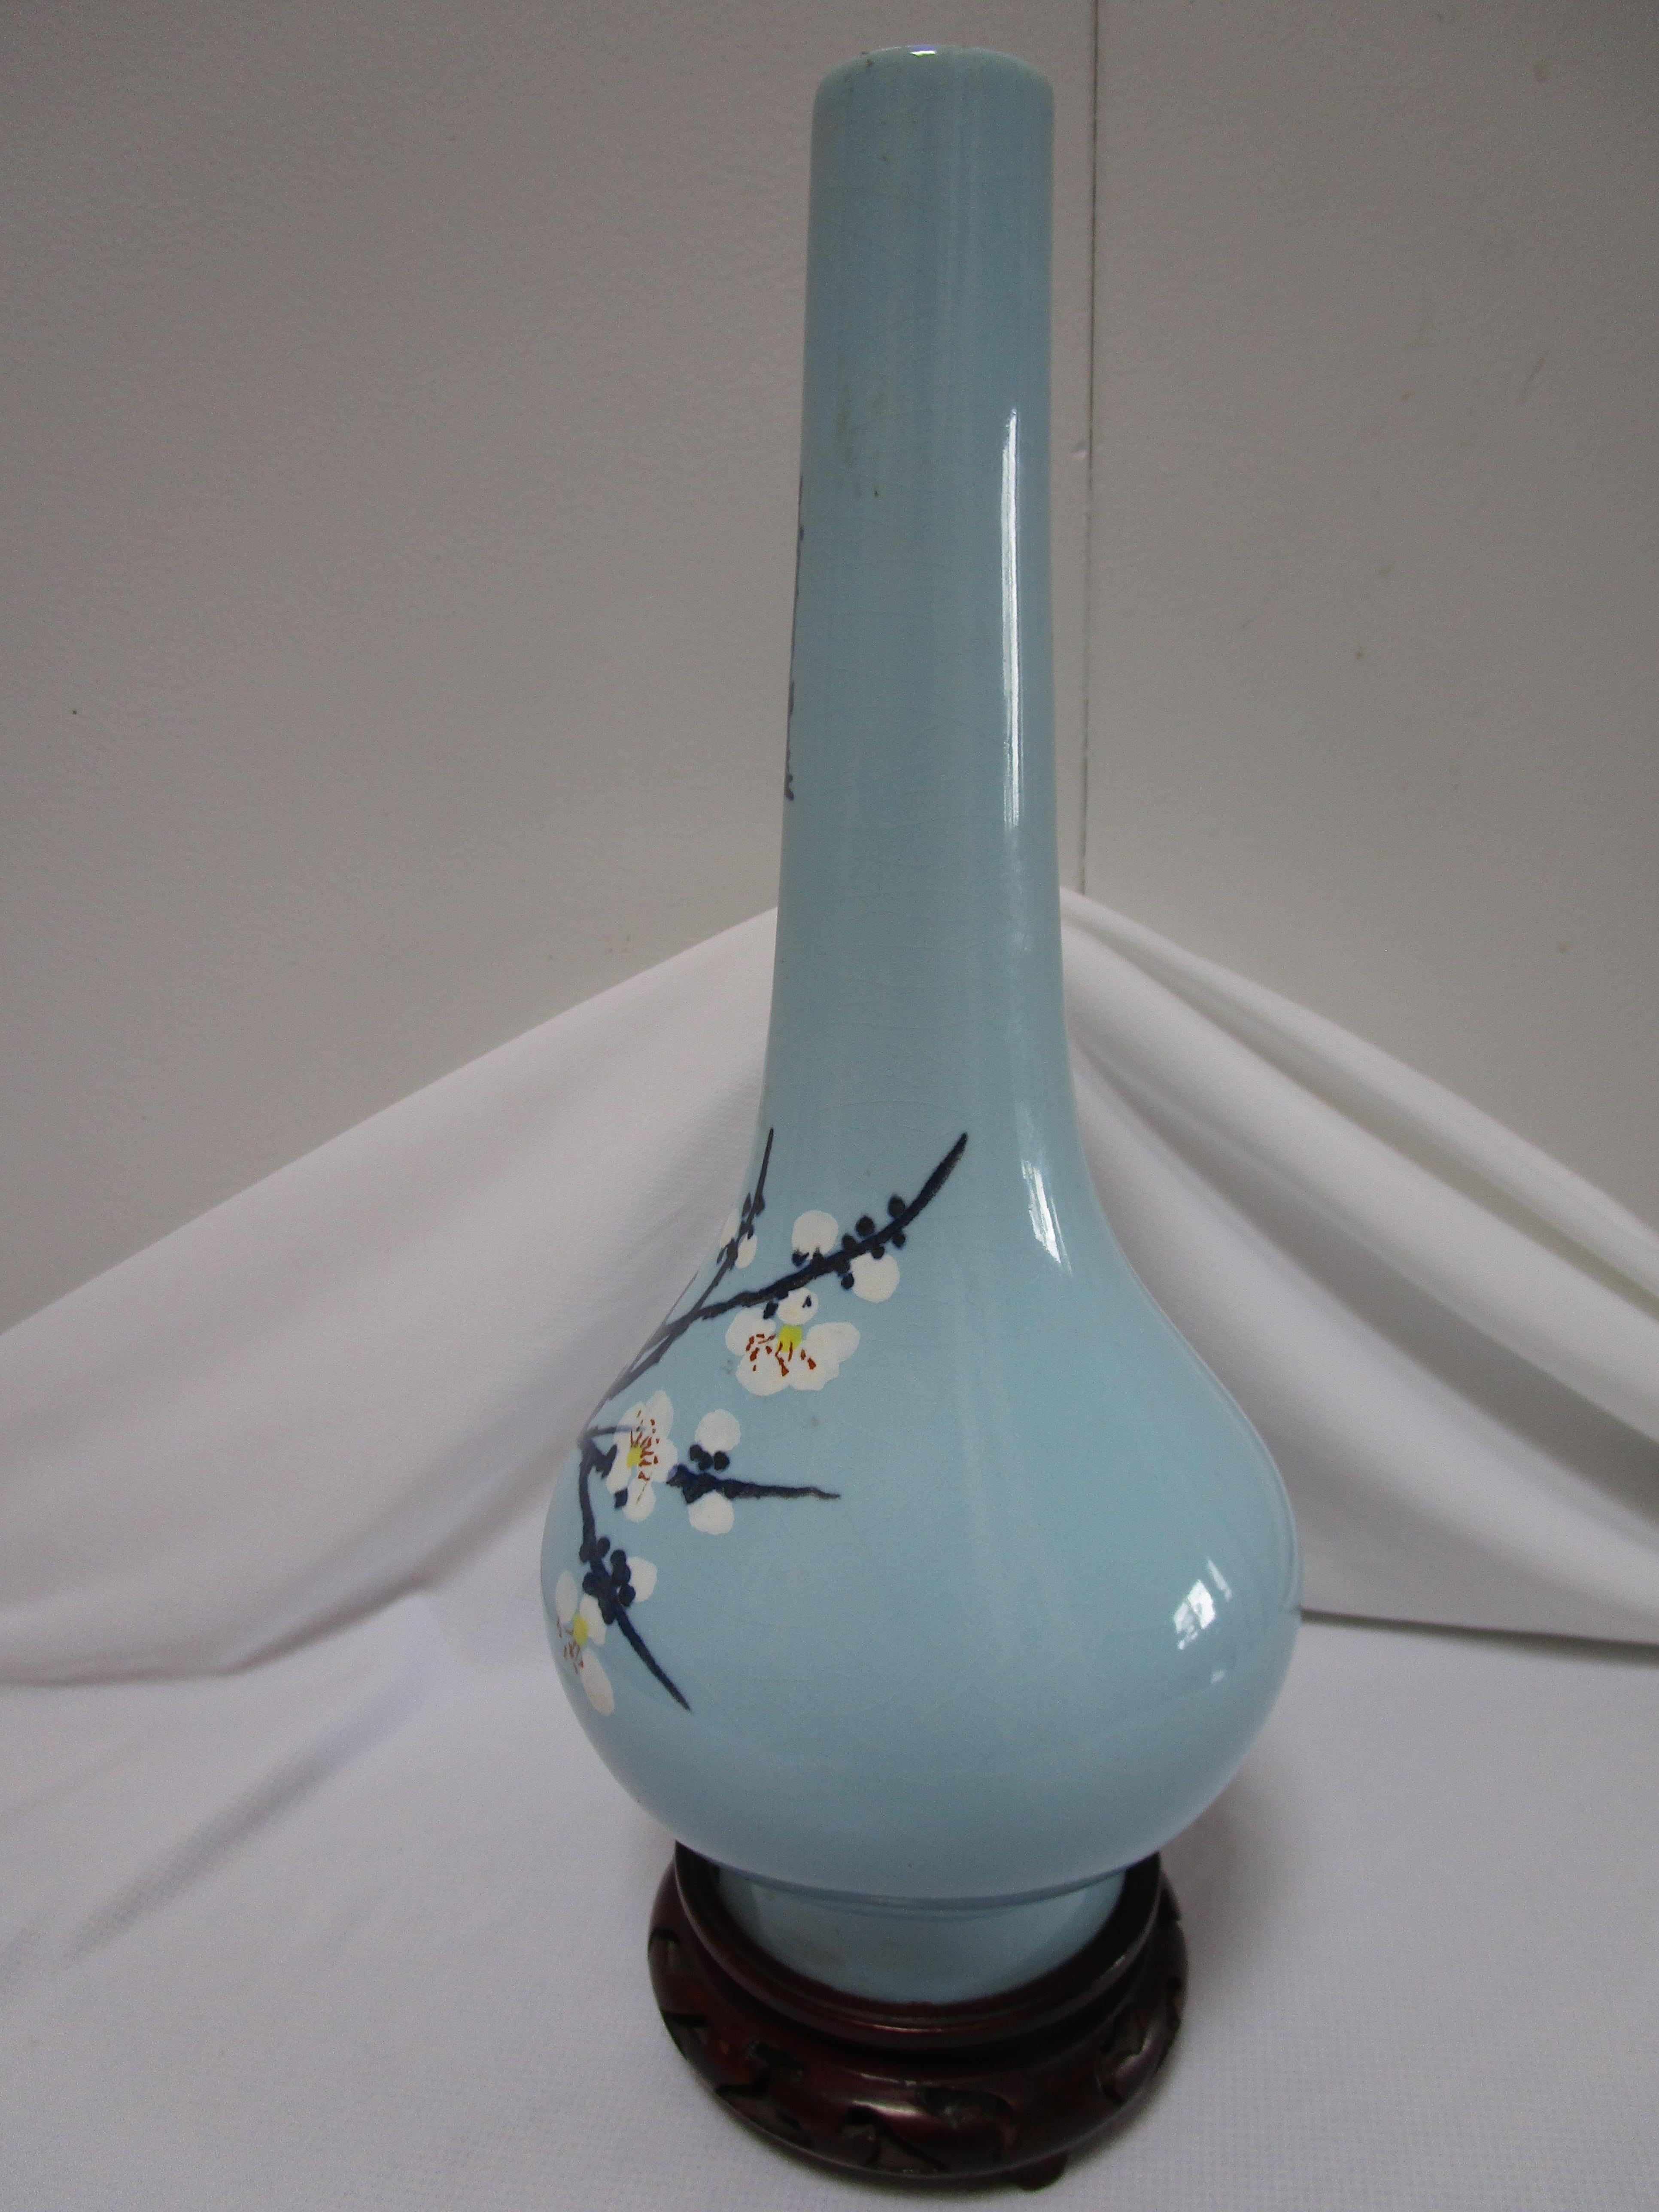 Turquoise Vintage Japanese Ceramic Bulbous Vase on Rosewood Stand In Good Condition For Sale In Lomita, CA